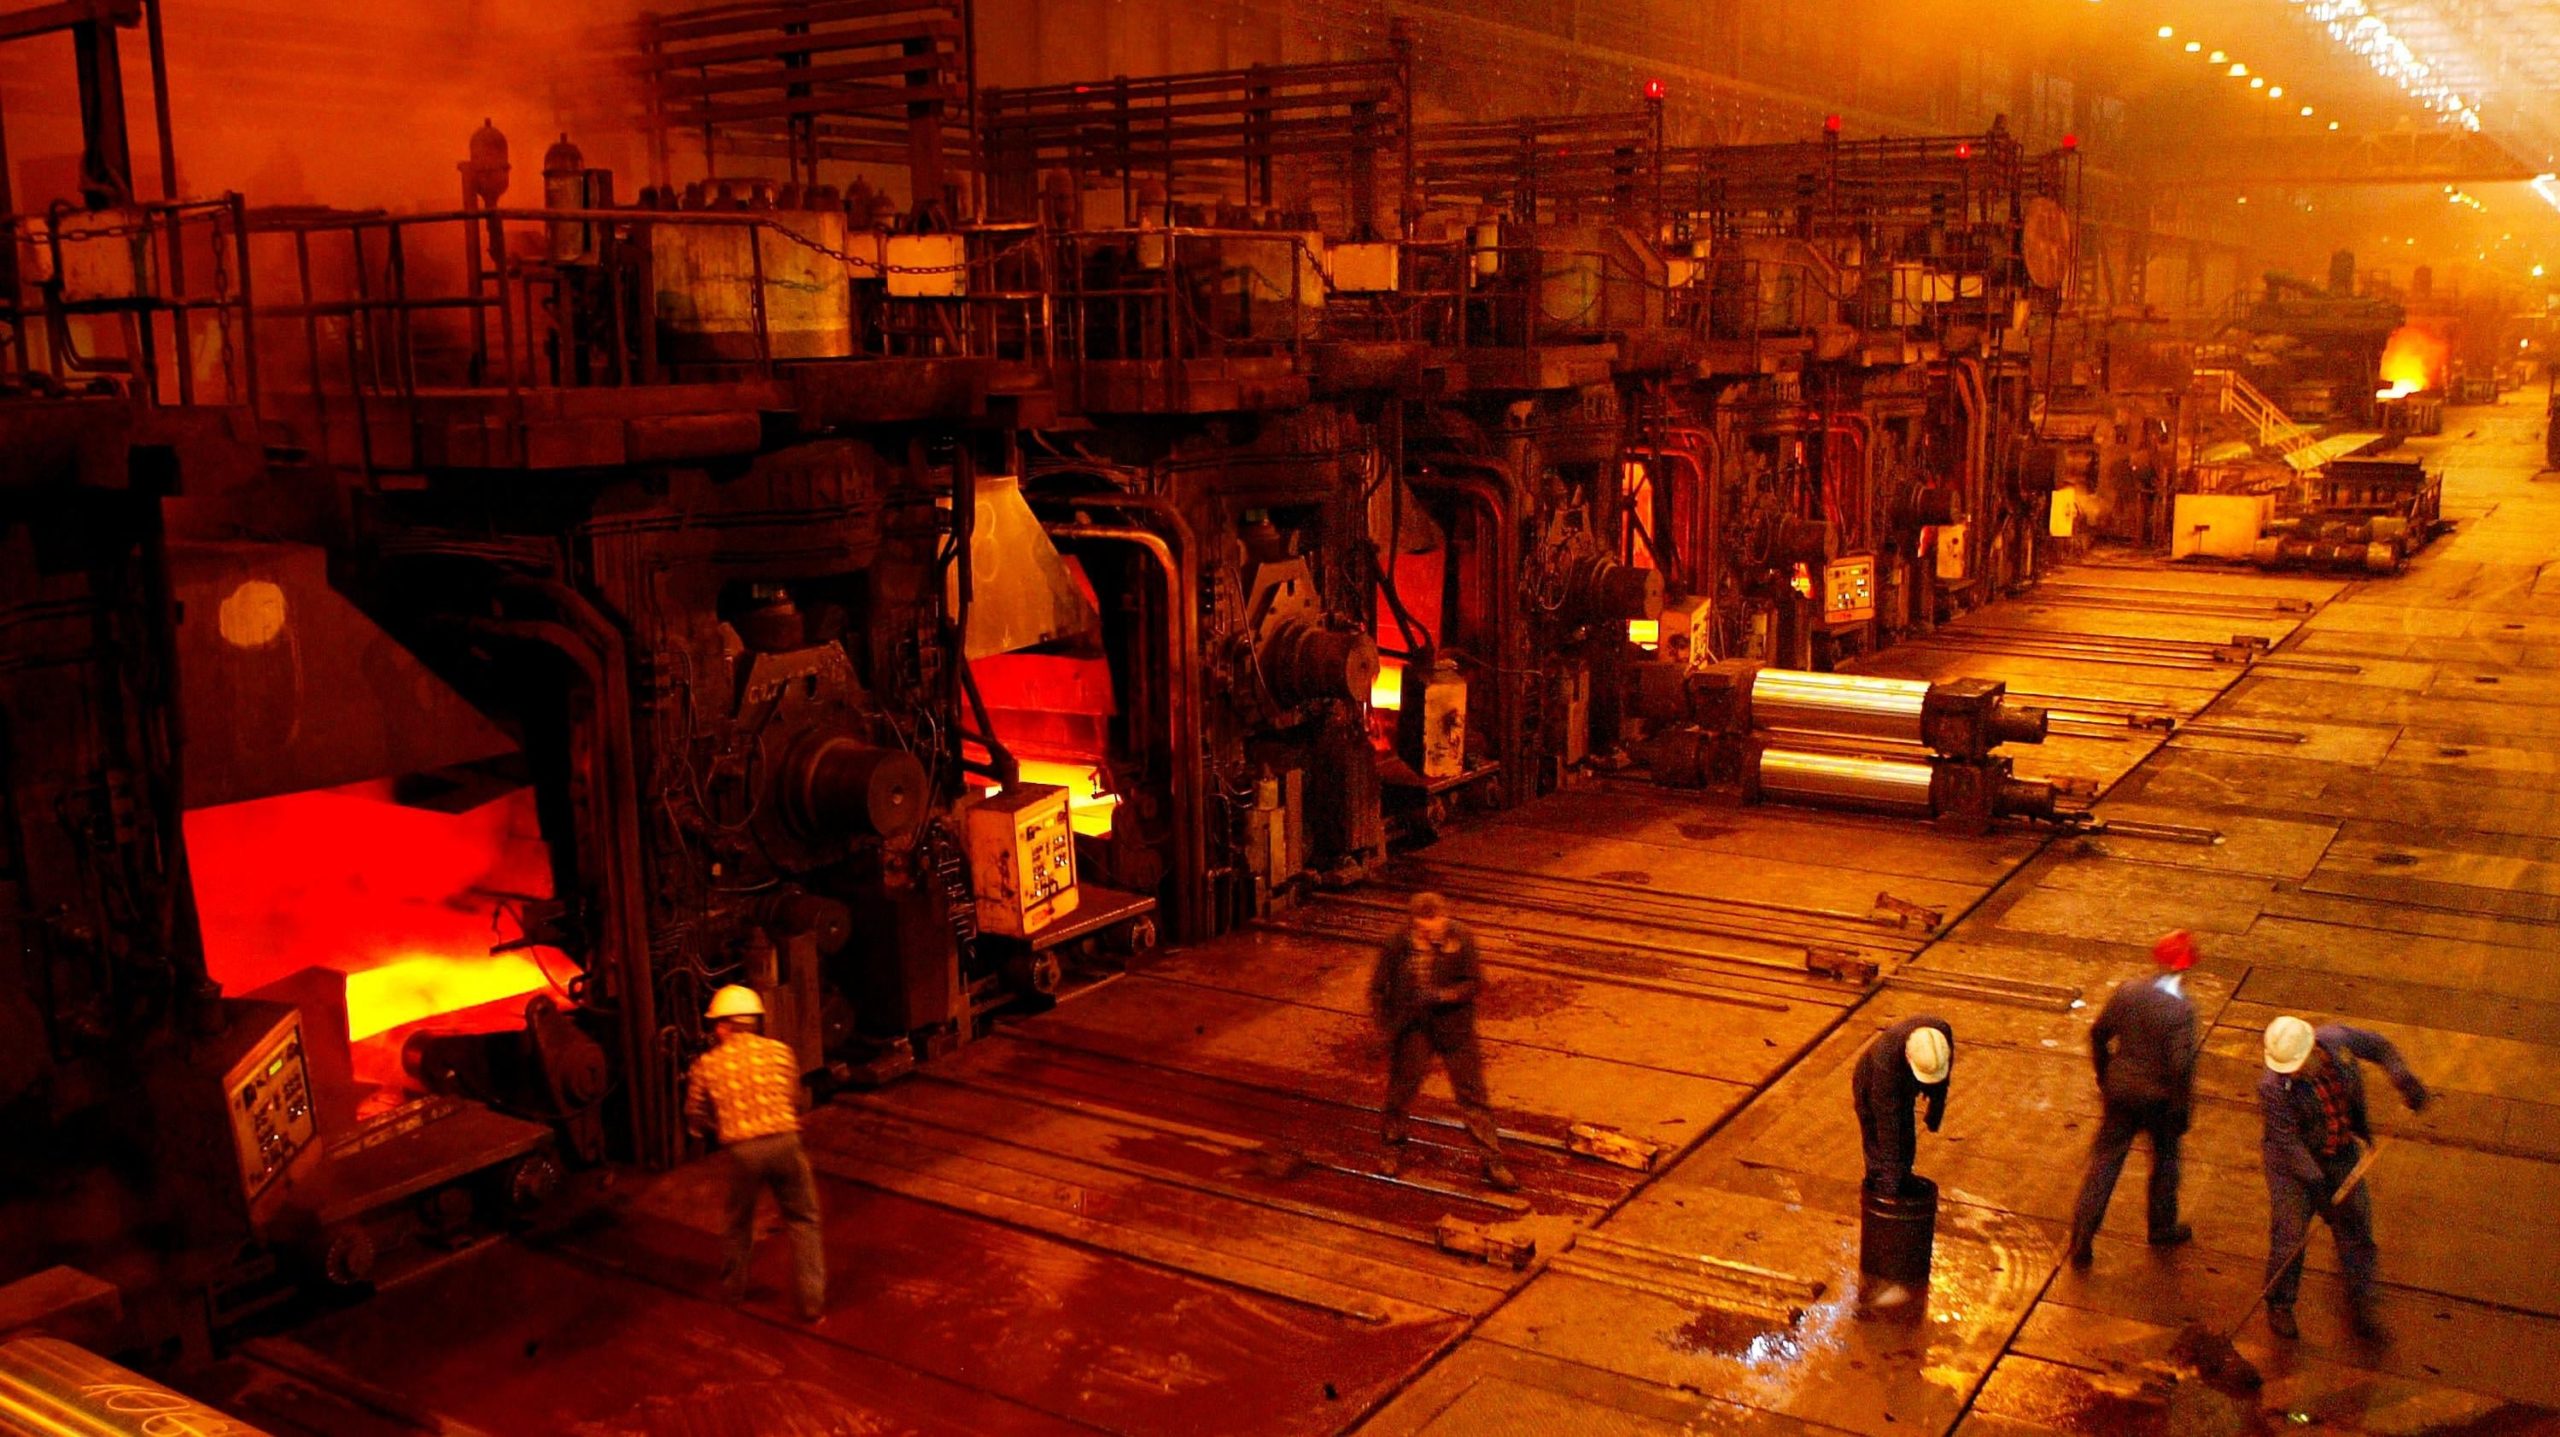 Workers clean the floors next to the hot rolling mill at the Sendzimir steel plant in Poland. (Photo: Sean Gallup, Getty Images)